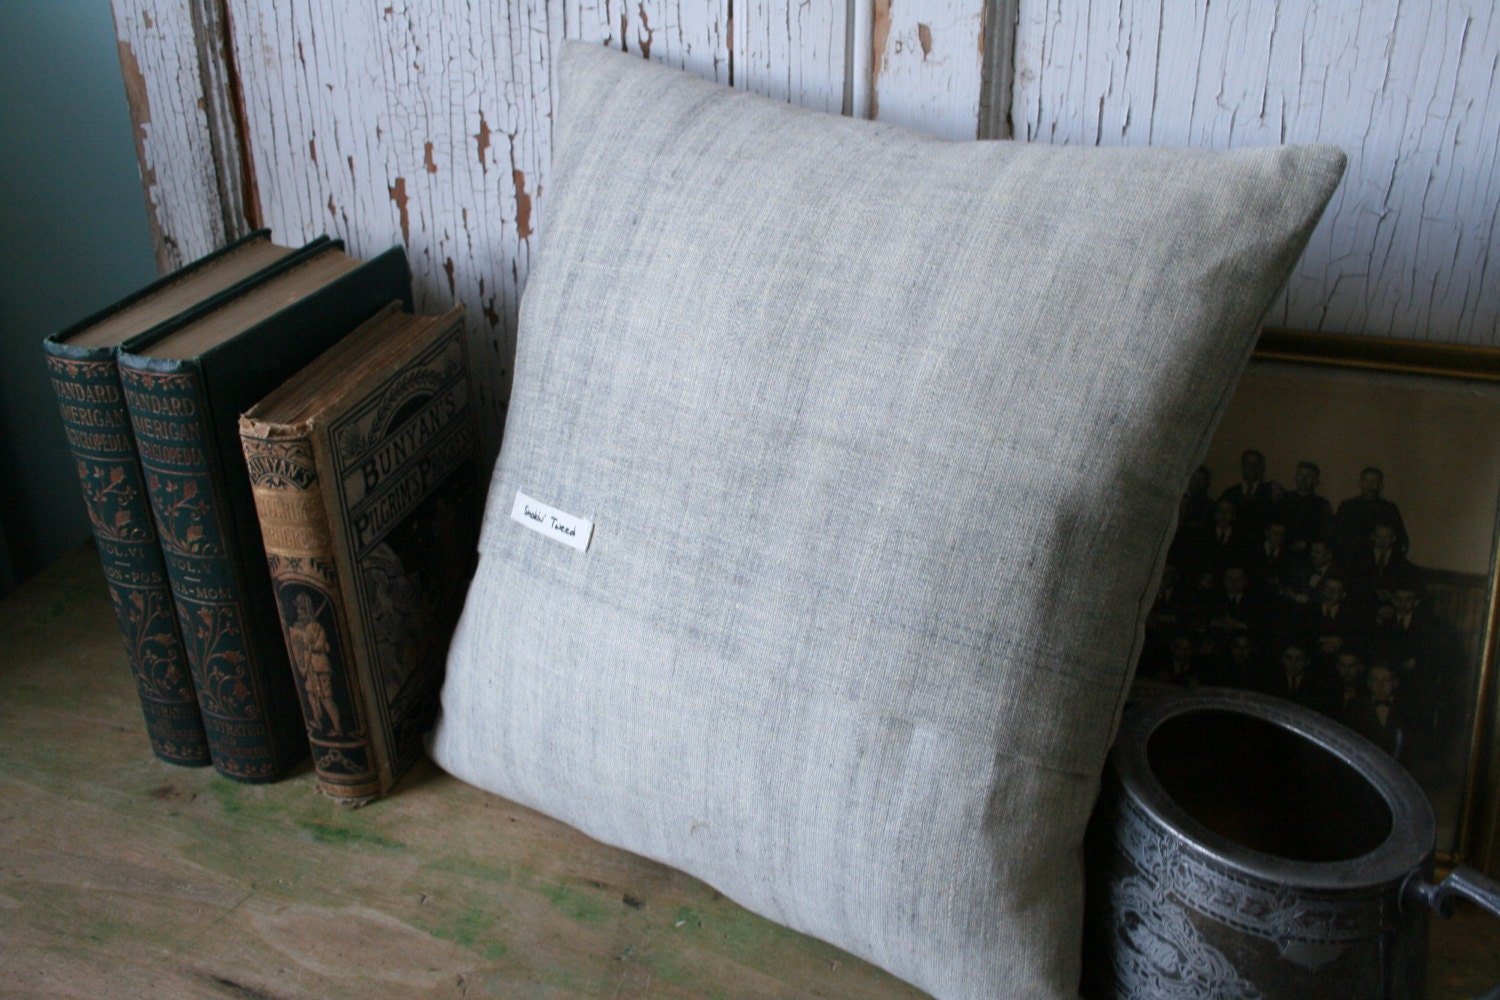 Monogram T PILLOW COVER Flax Cotton, Wool Tweed, Herringbone, Recycled, Eco-Friendly Decor